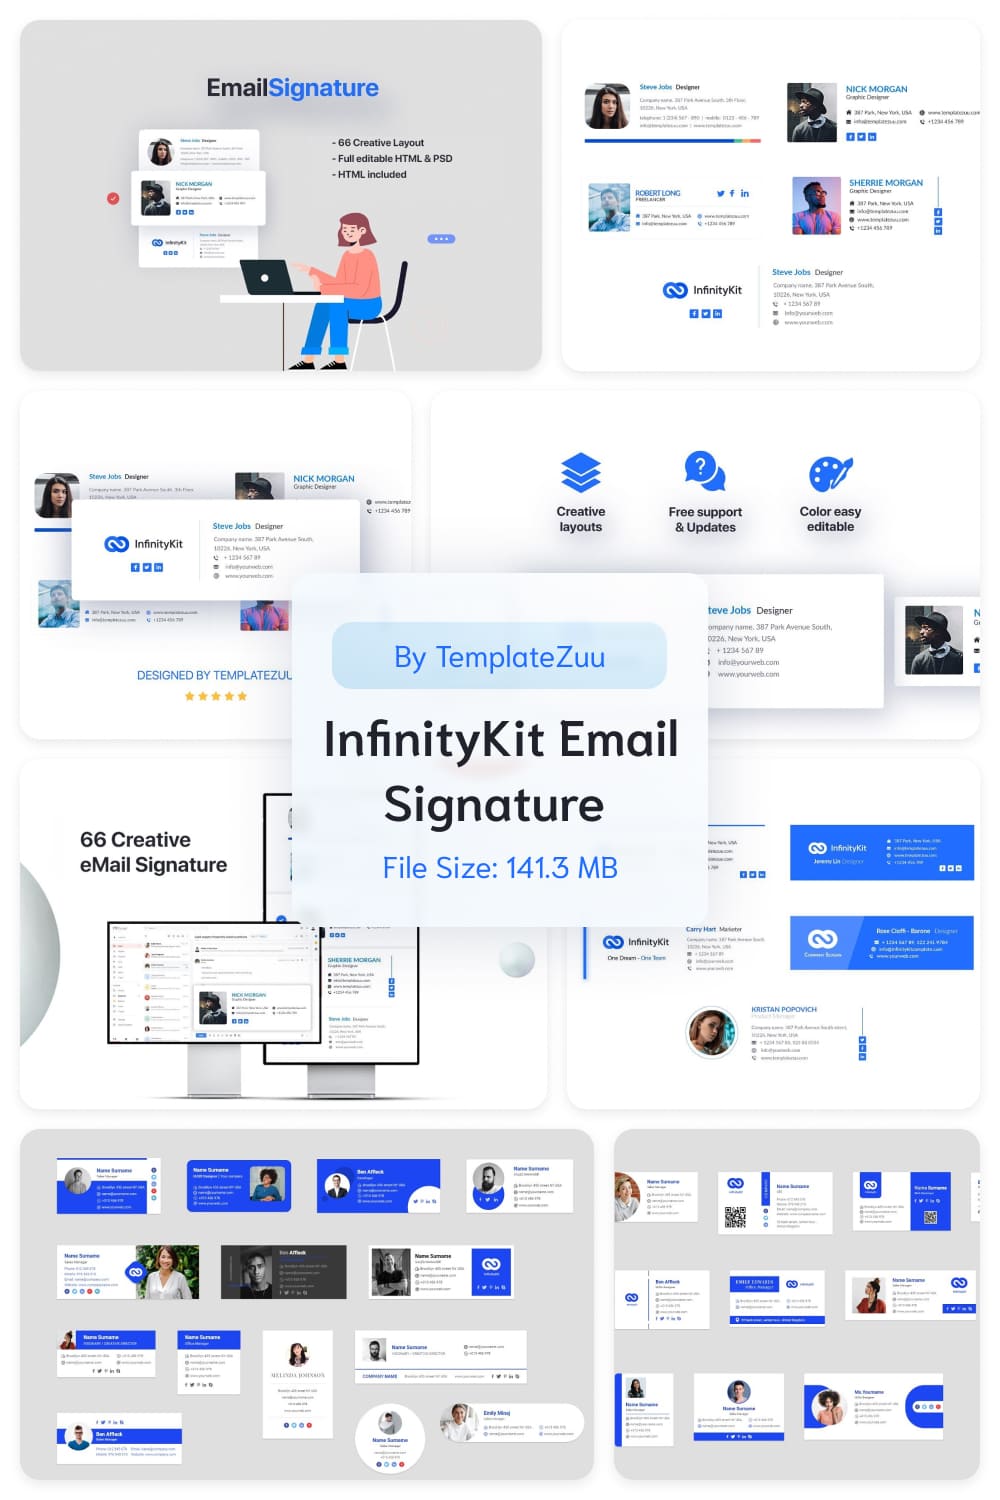 InfinityKit Email Signature v1.3 by MasterBundles Pinterest Collage Image.